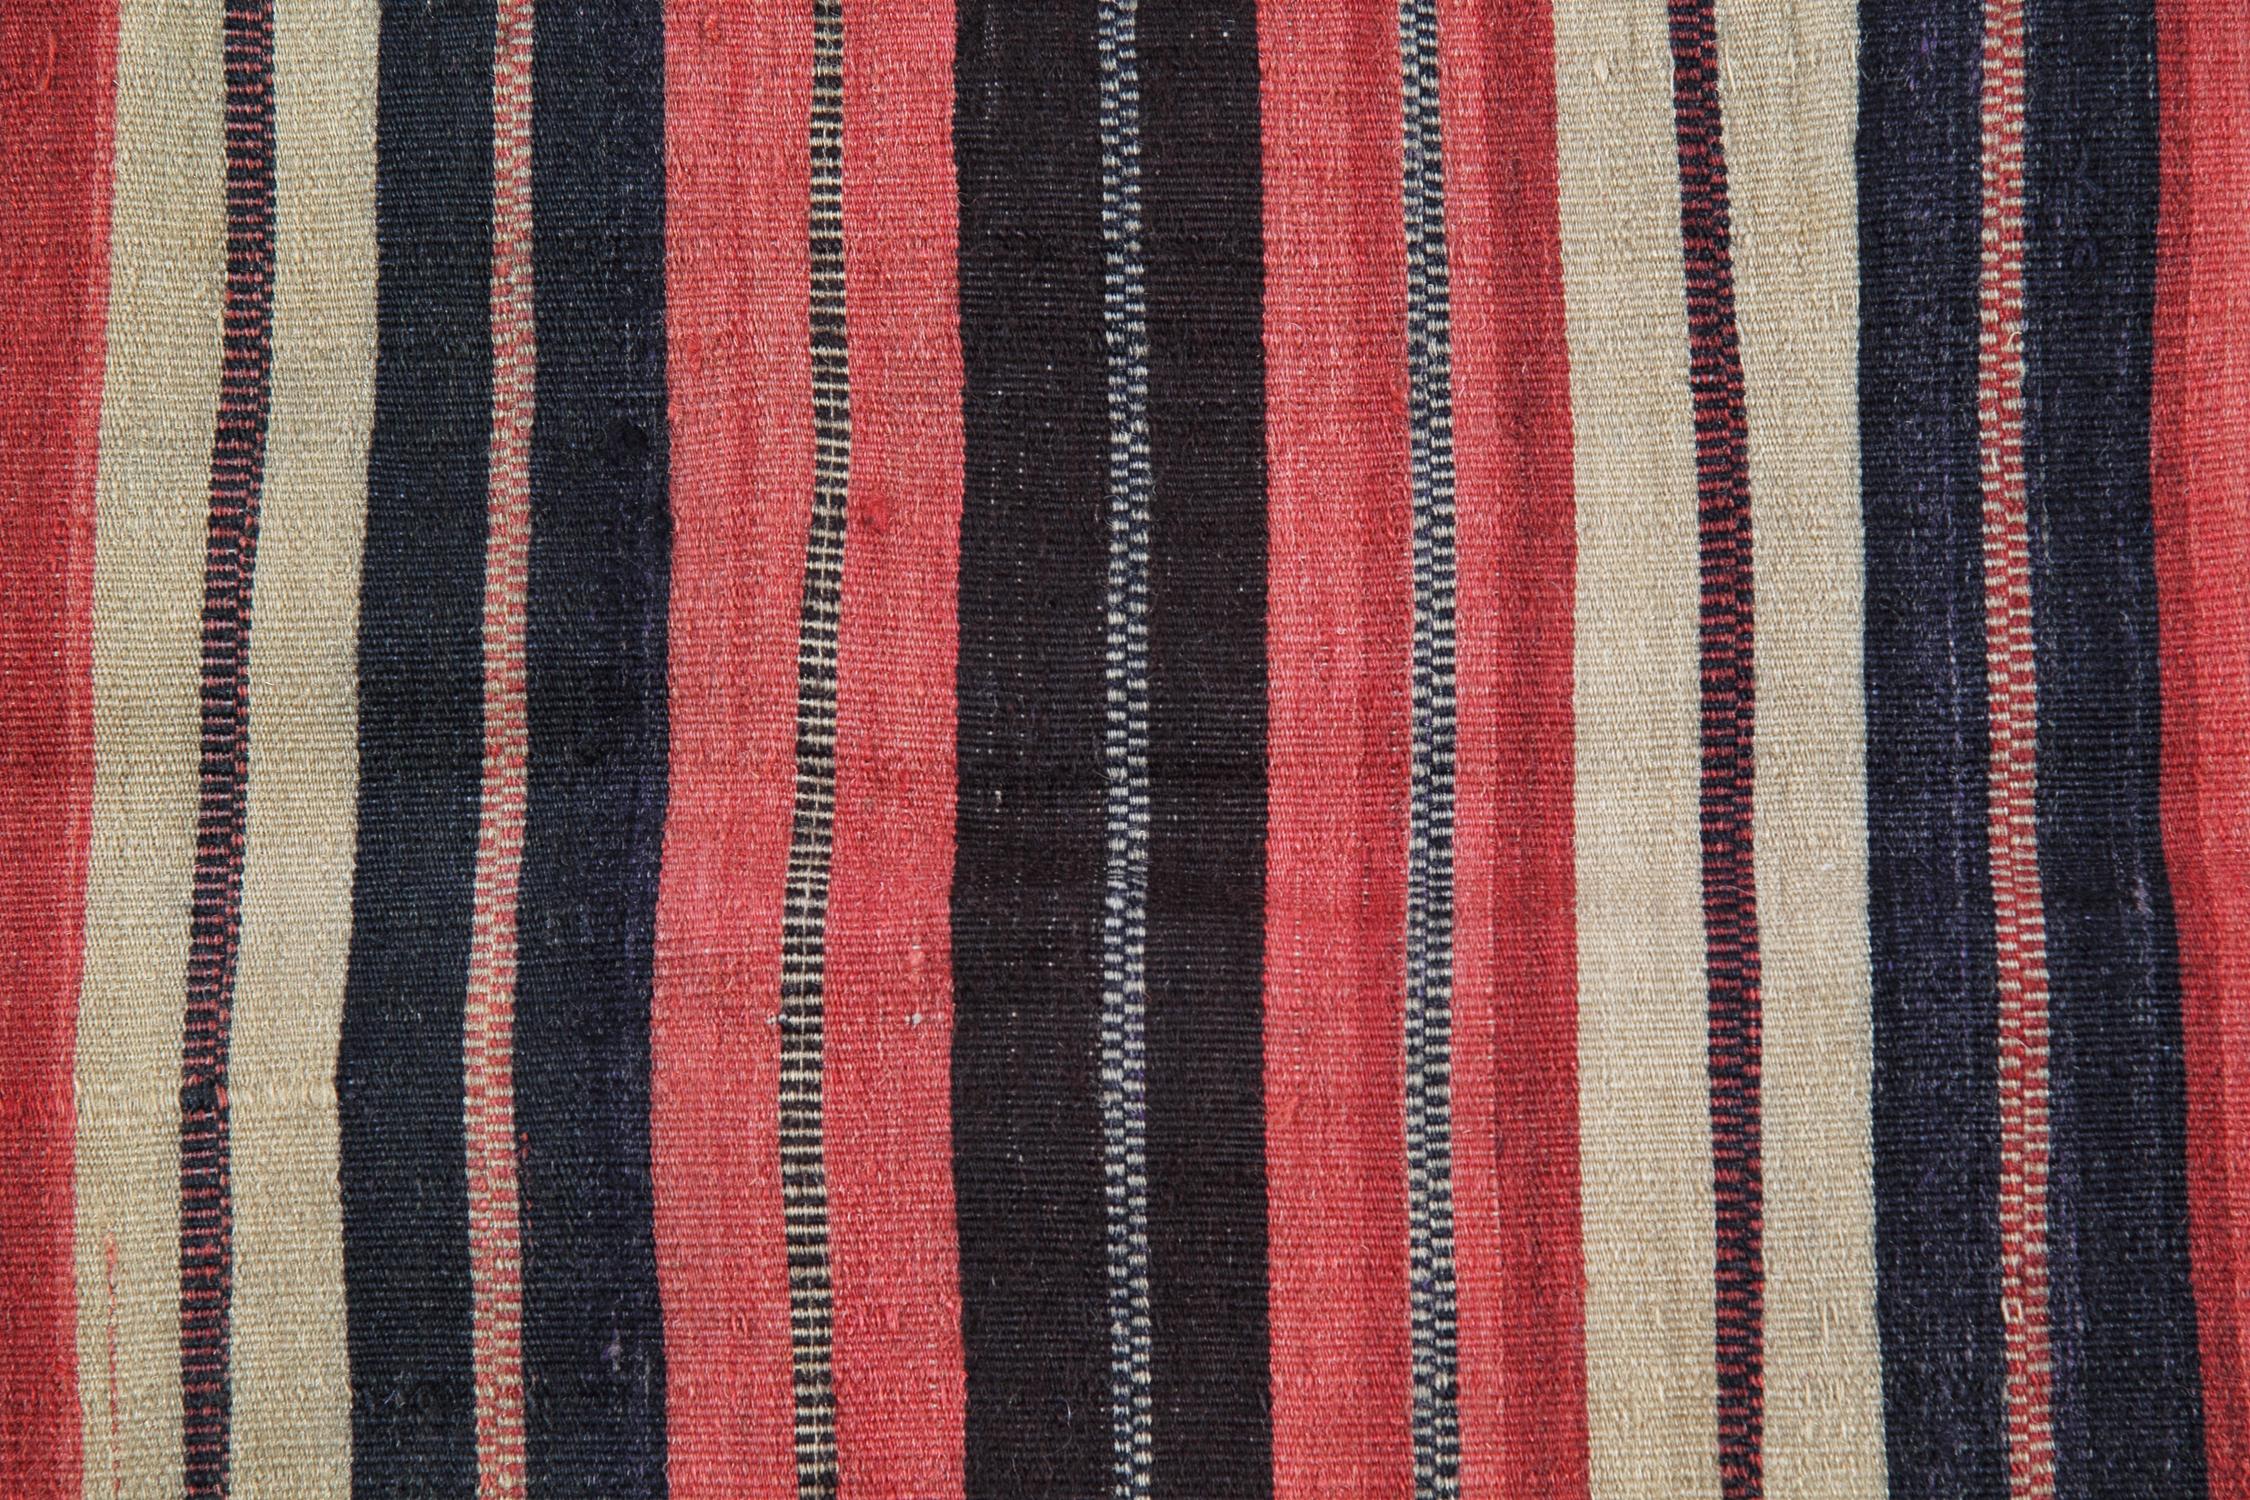 Vegetable Dyed Antique Rugs Caucasian Kilim Rug Jajim Traditional Wool Striped Carpet For Sale